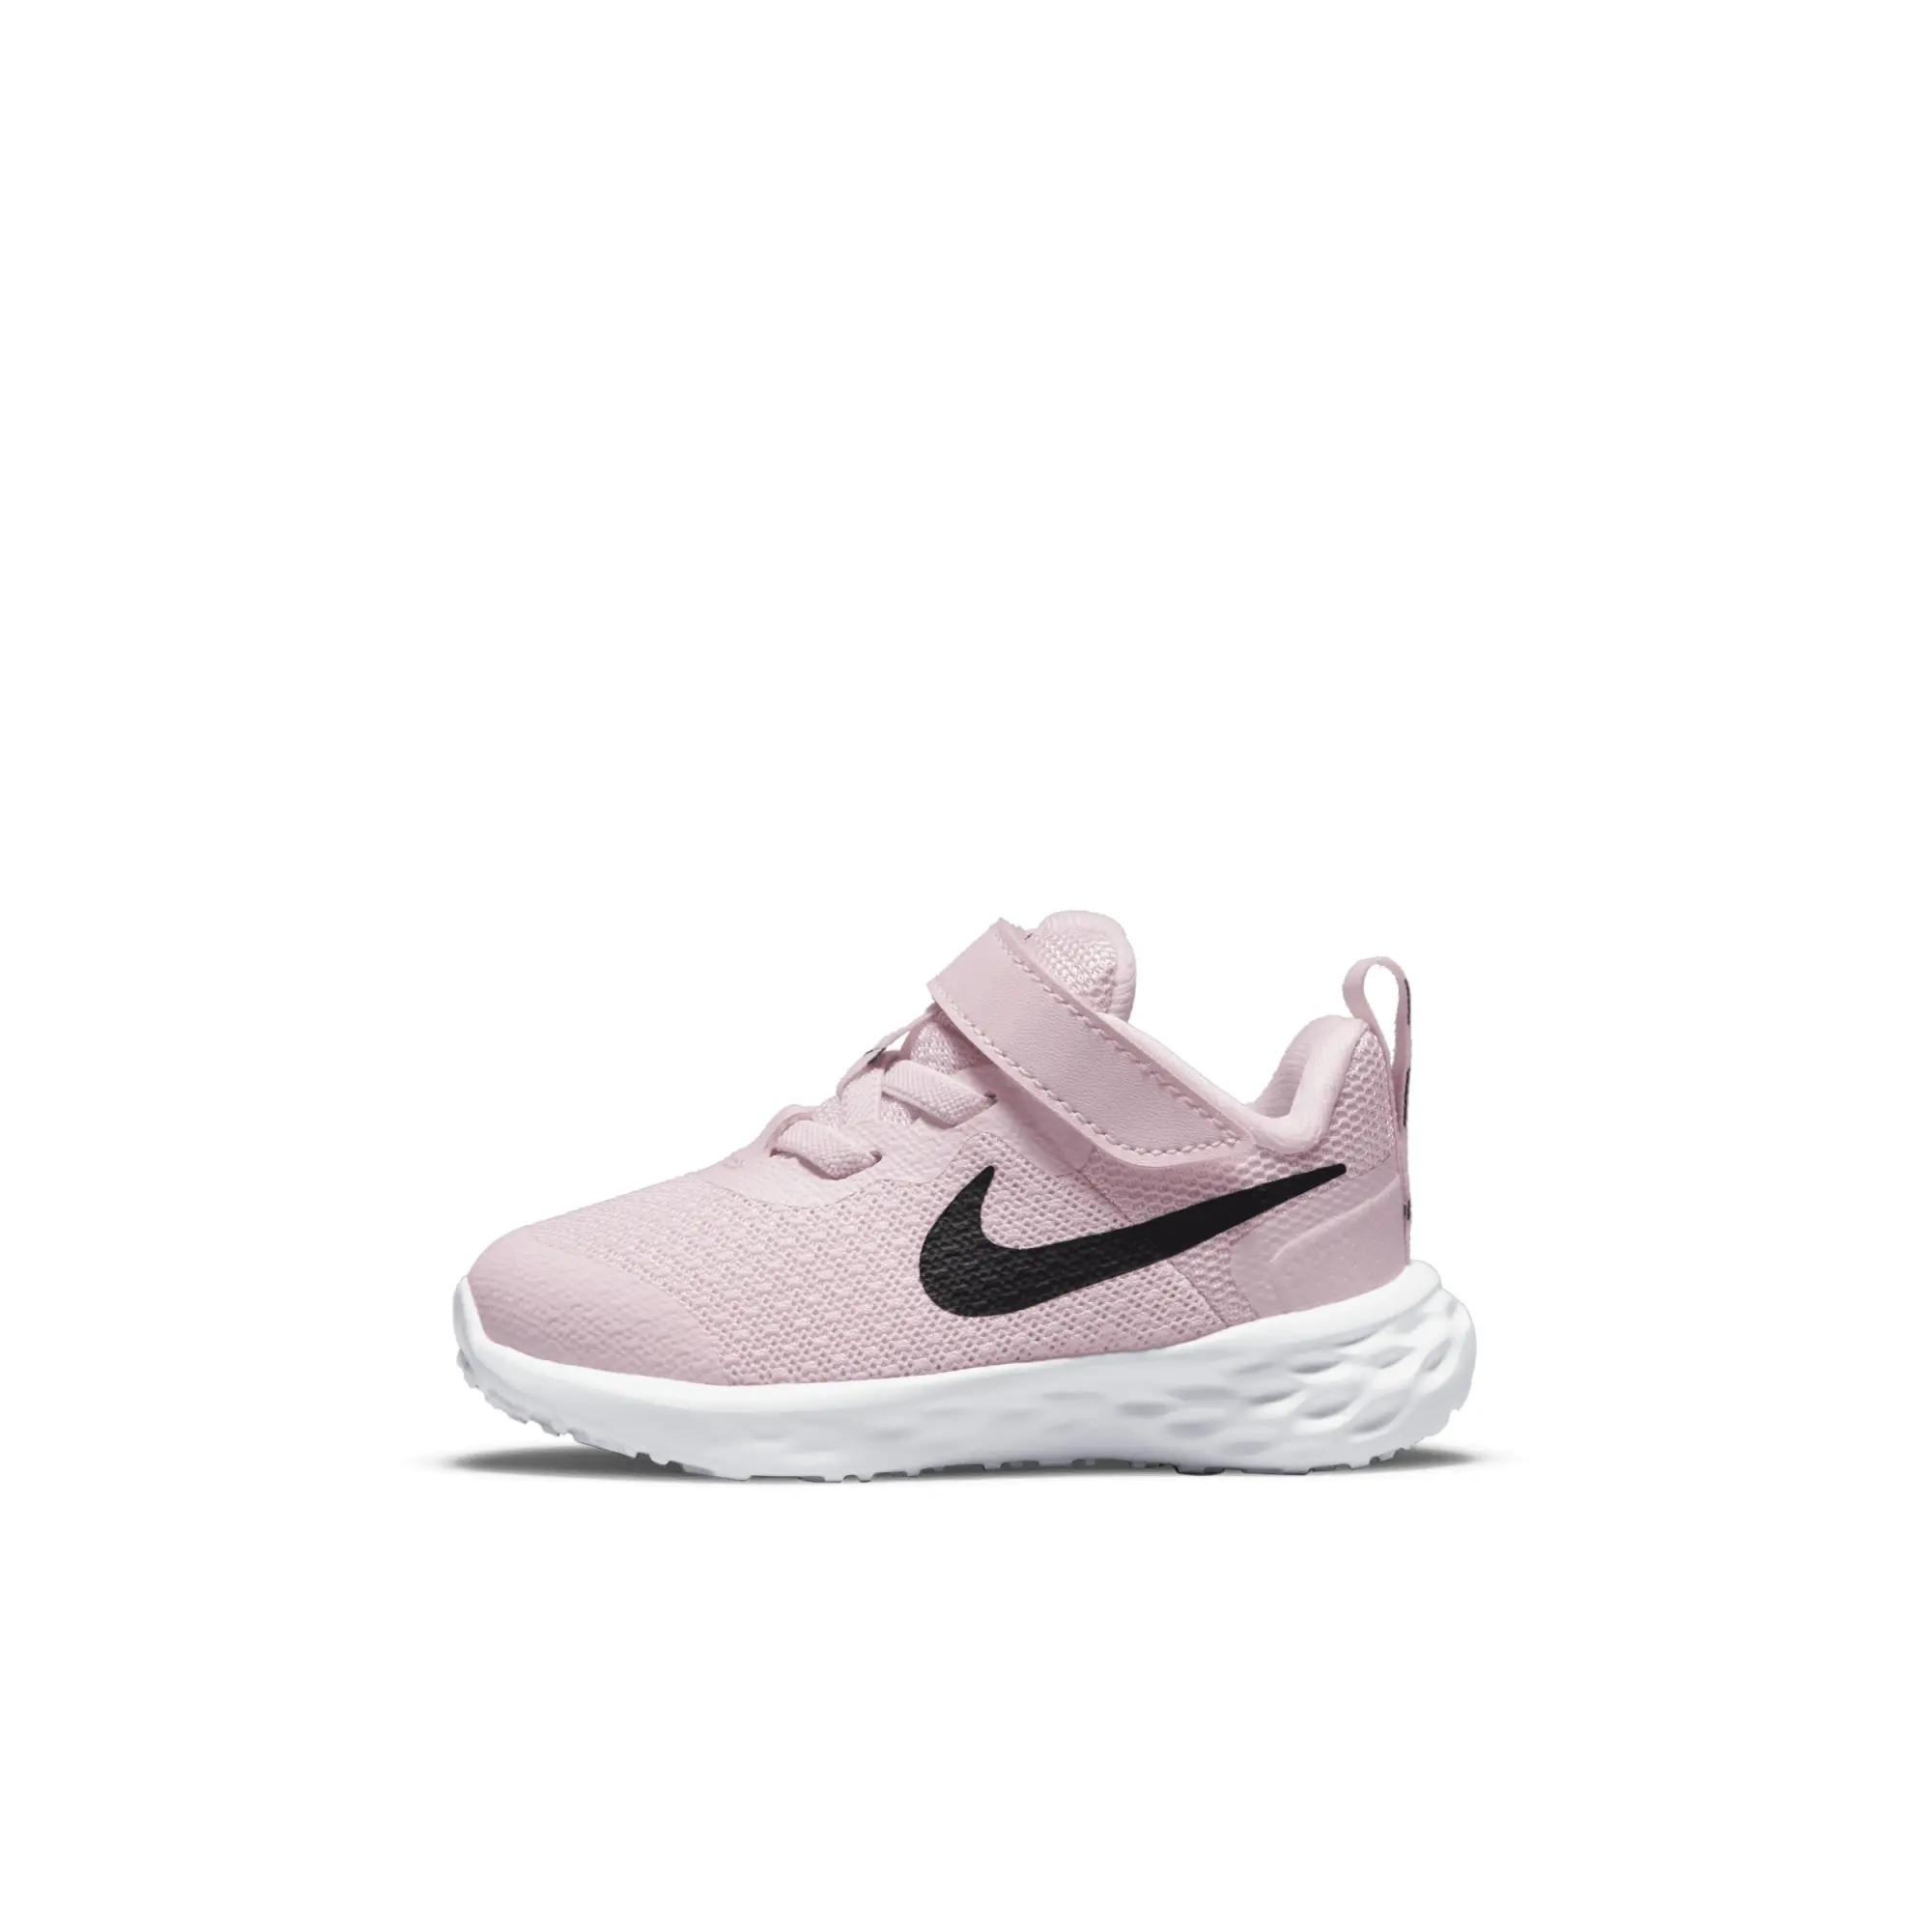 Nike pale pink revolution 6 Girls Toddler Trainers